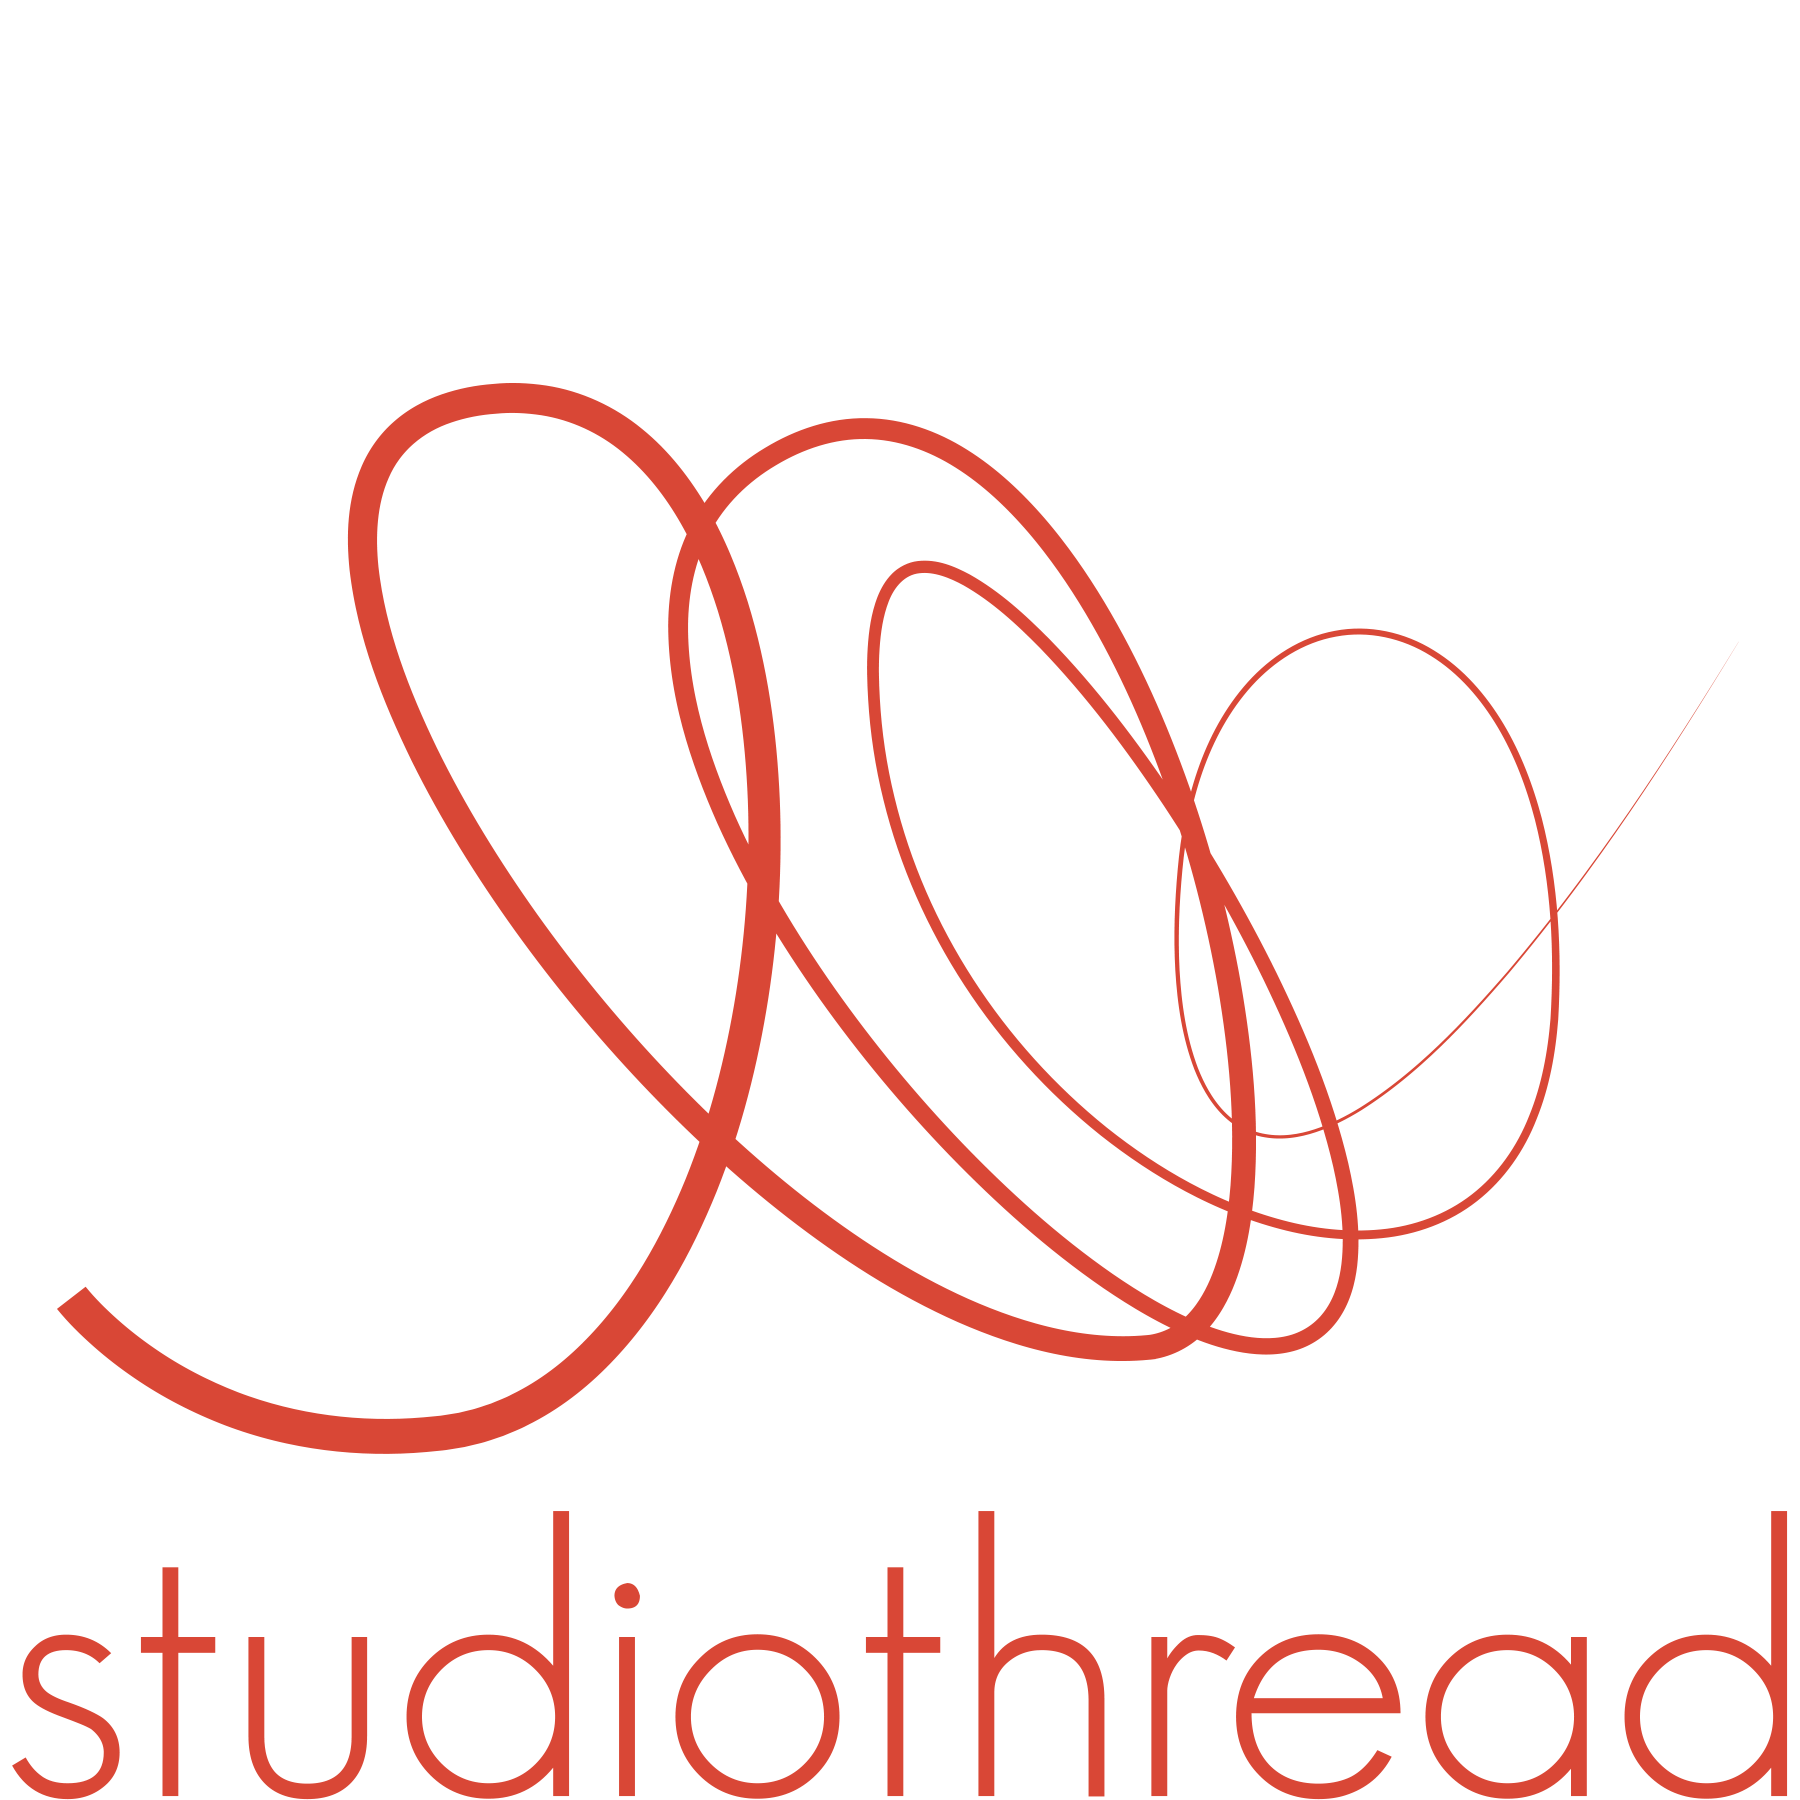 3 swoops creating the studiothread logo, each swoop represents a part of our process